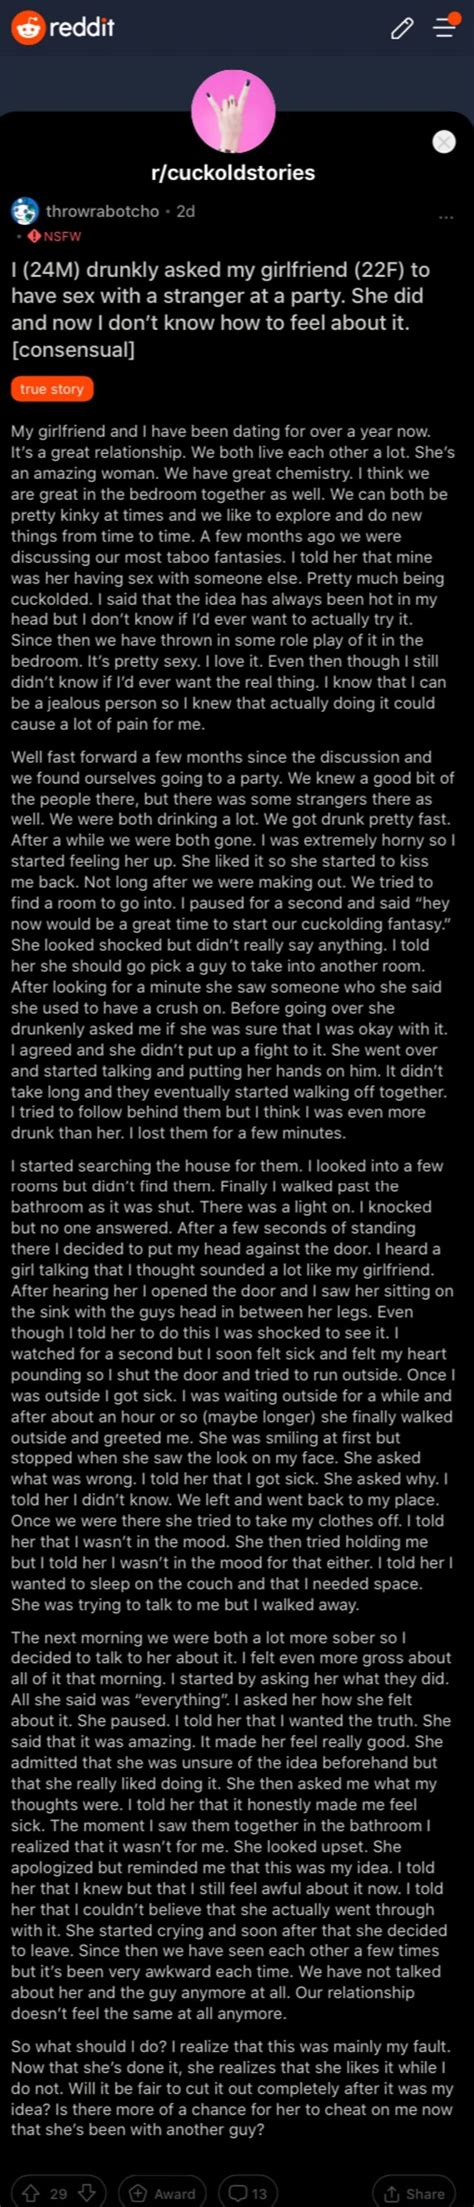 reddit throwrabotcho onsfw i drunkly asked my girlfriend to have sex